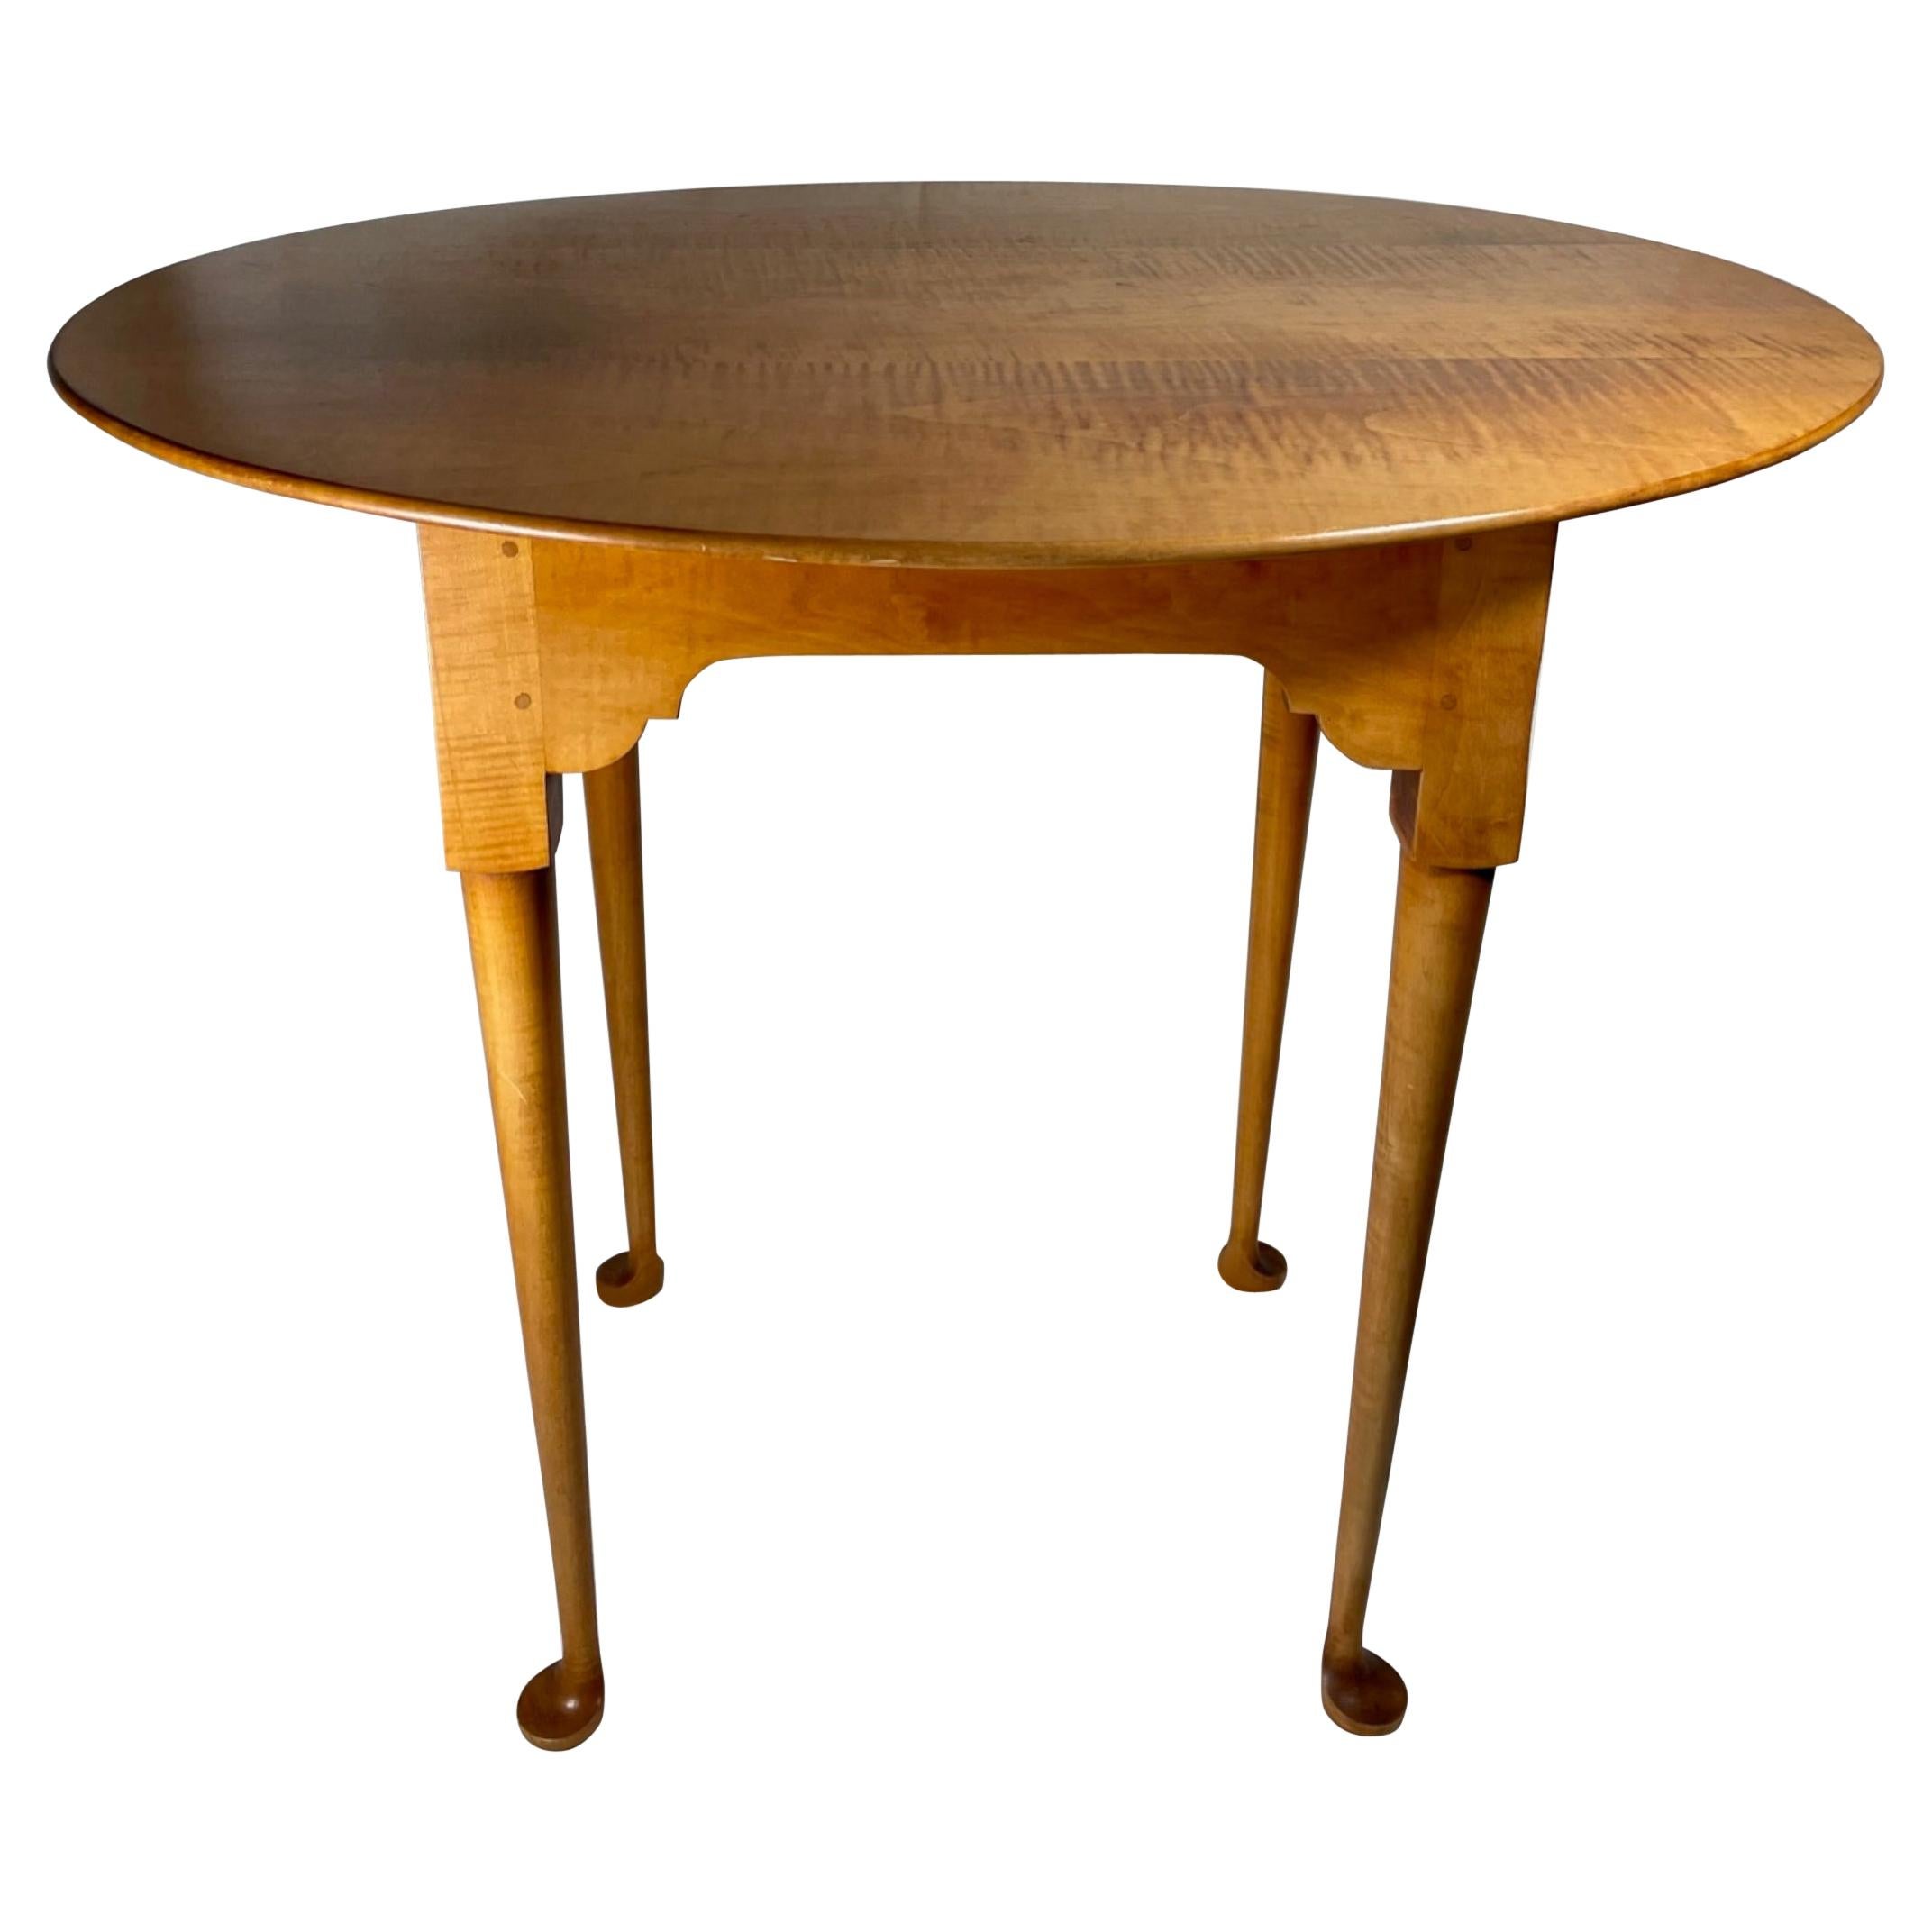 Queen Anne Style Side Table by Eldred Wheeler